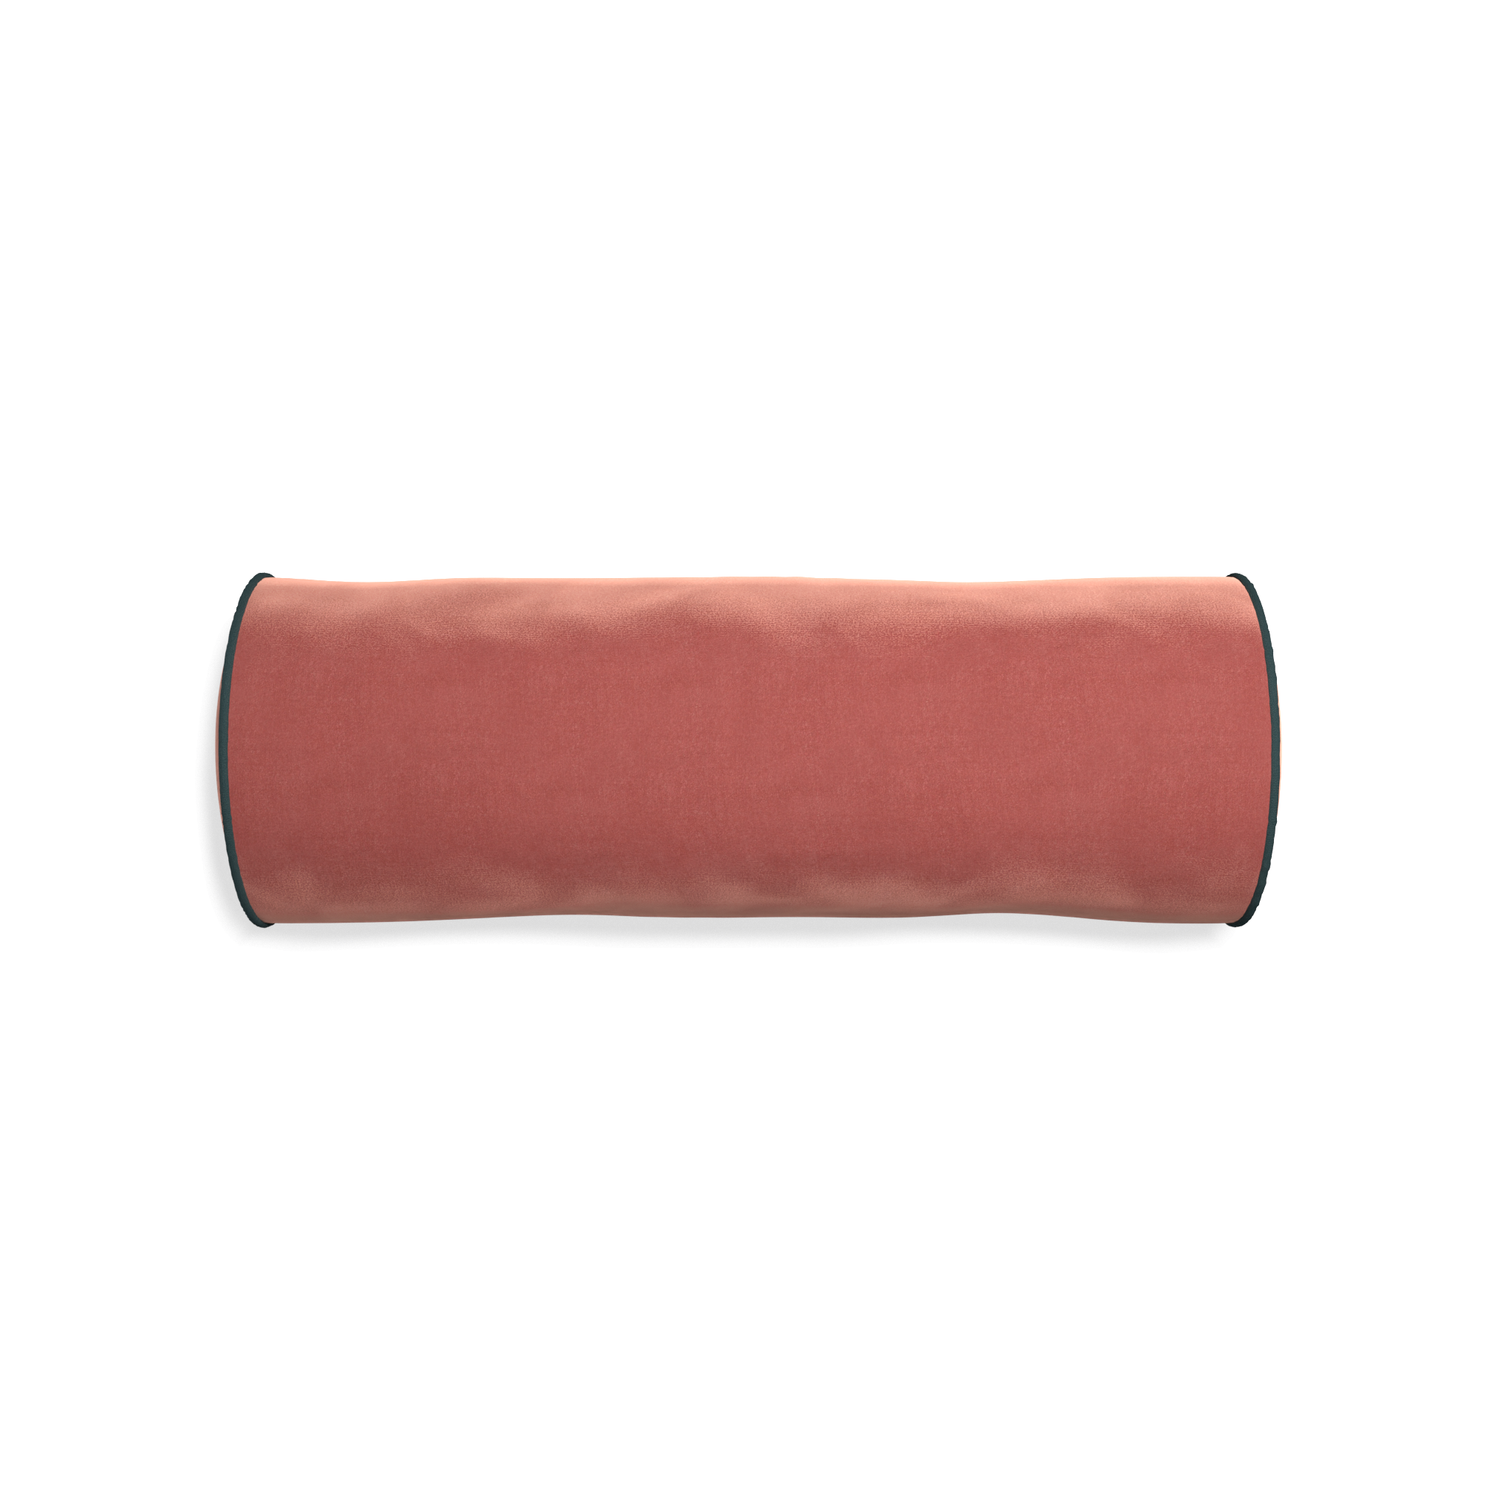 Bolster cosmo velvet custom coralpillow with p piping on white background